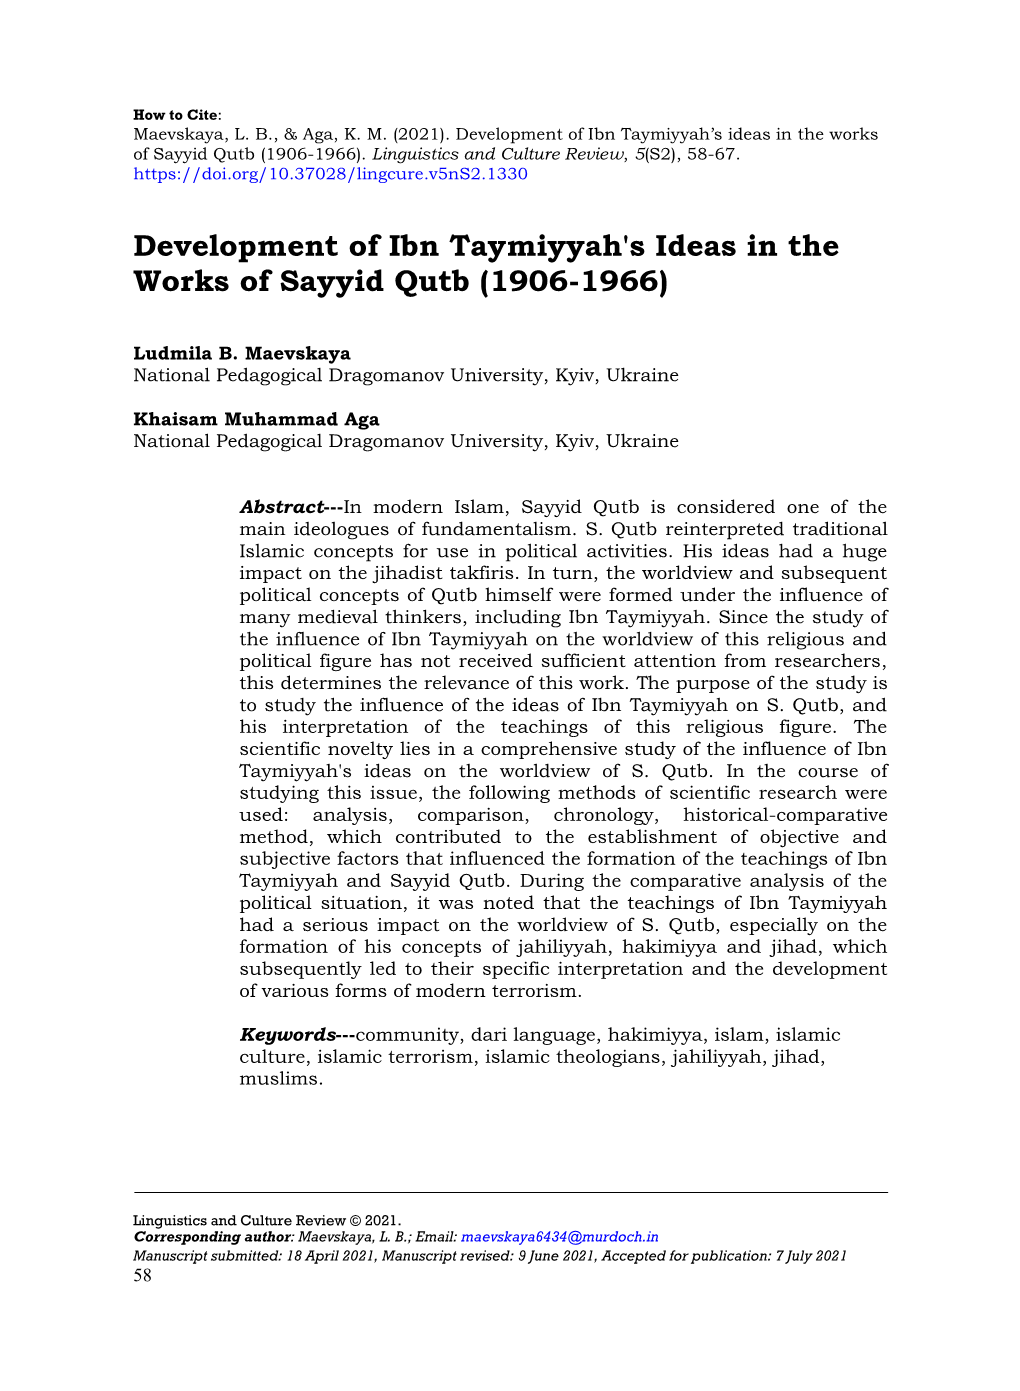 Development of Ibn Taymiyyah's Ideas in the Works of Sayyid Qutb (1906-1966)